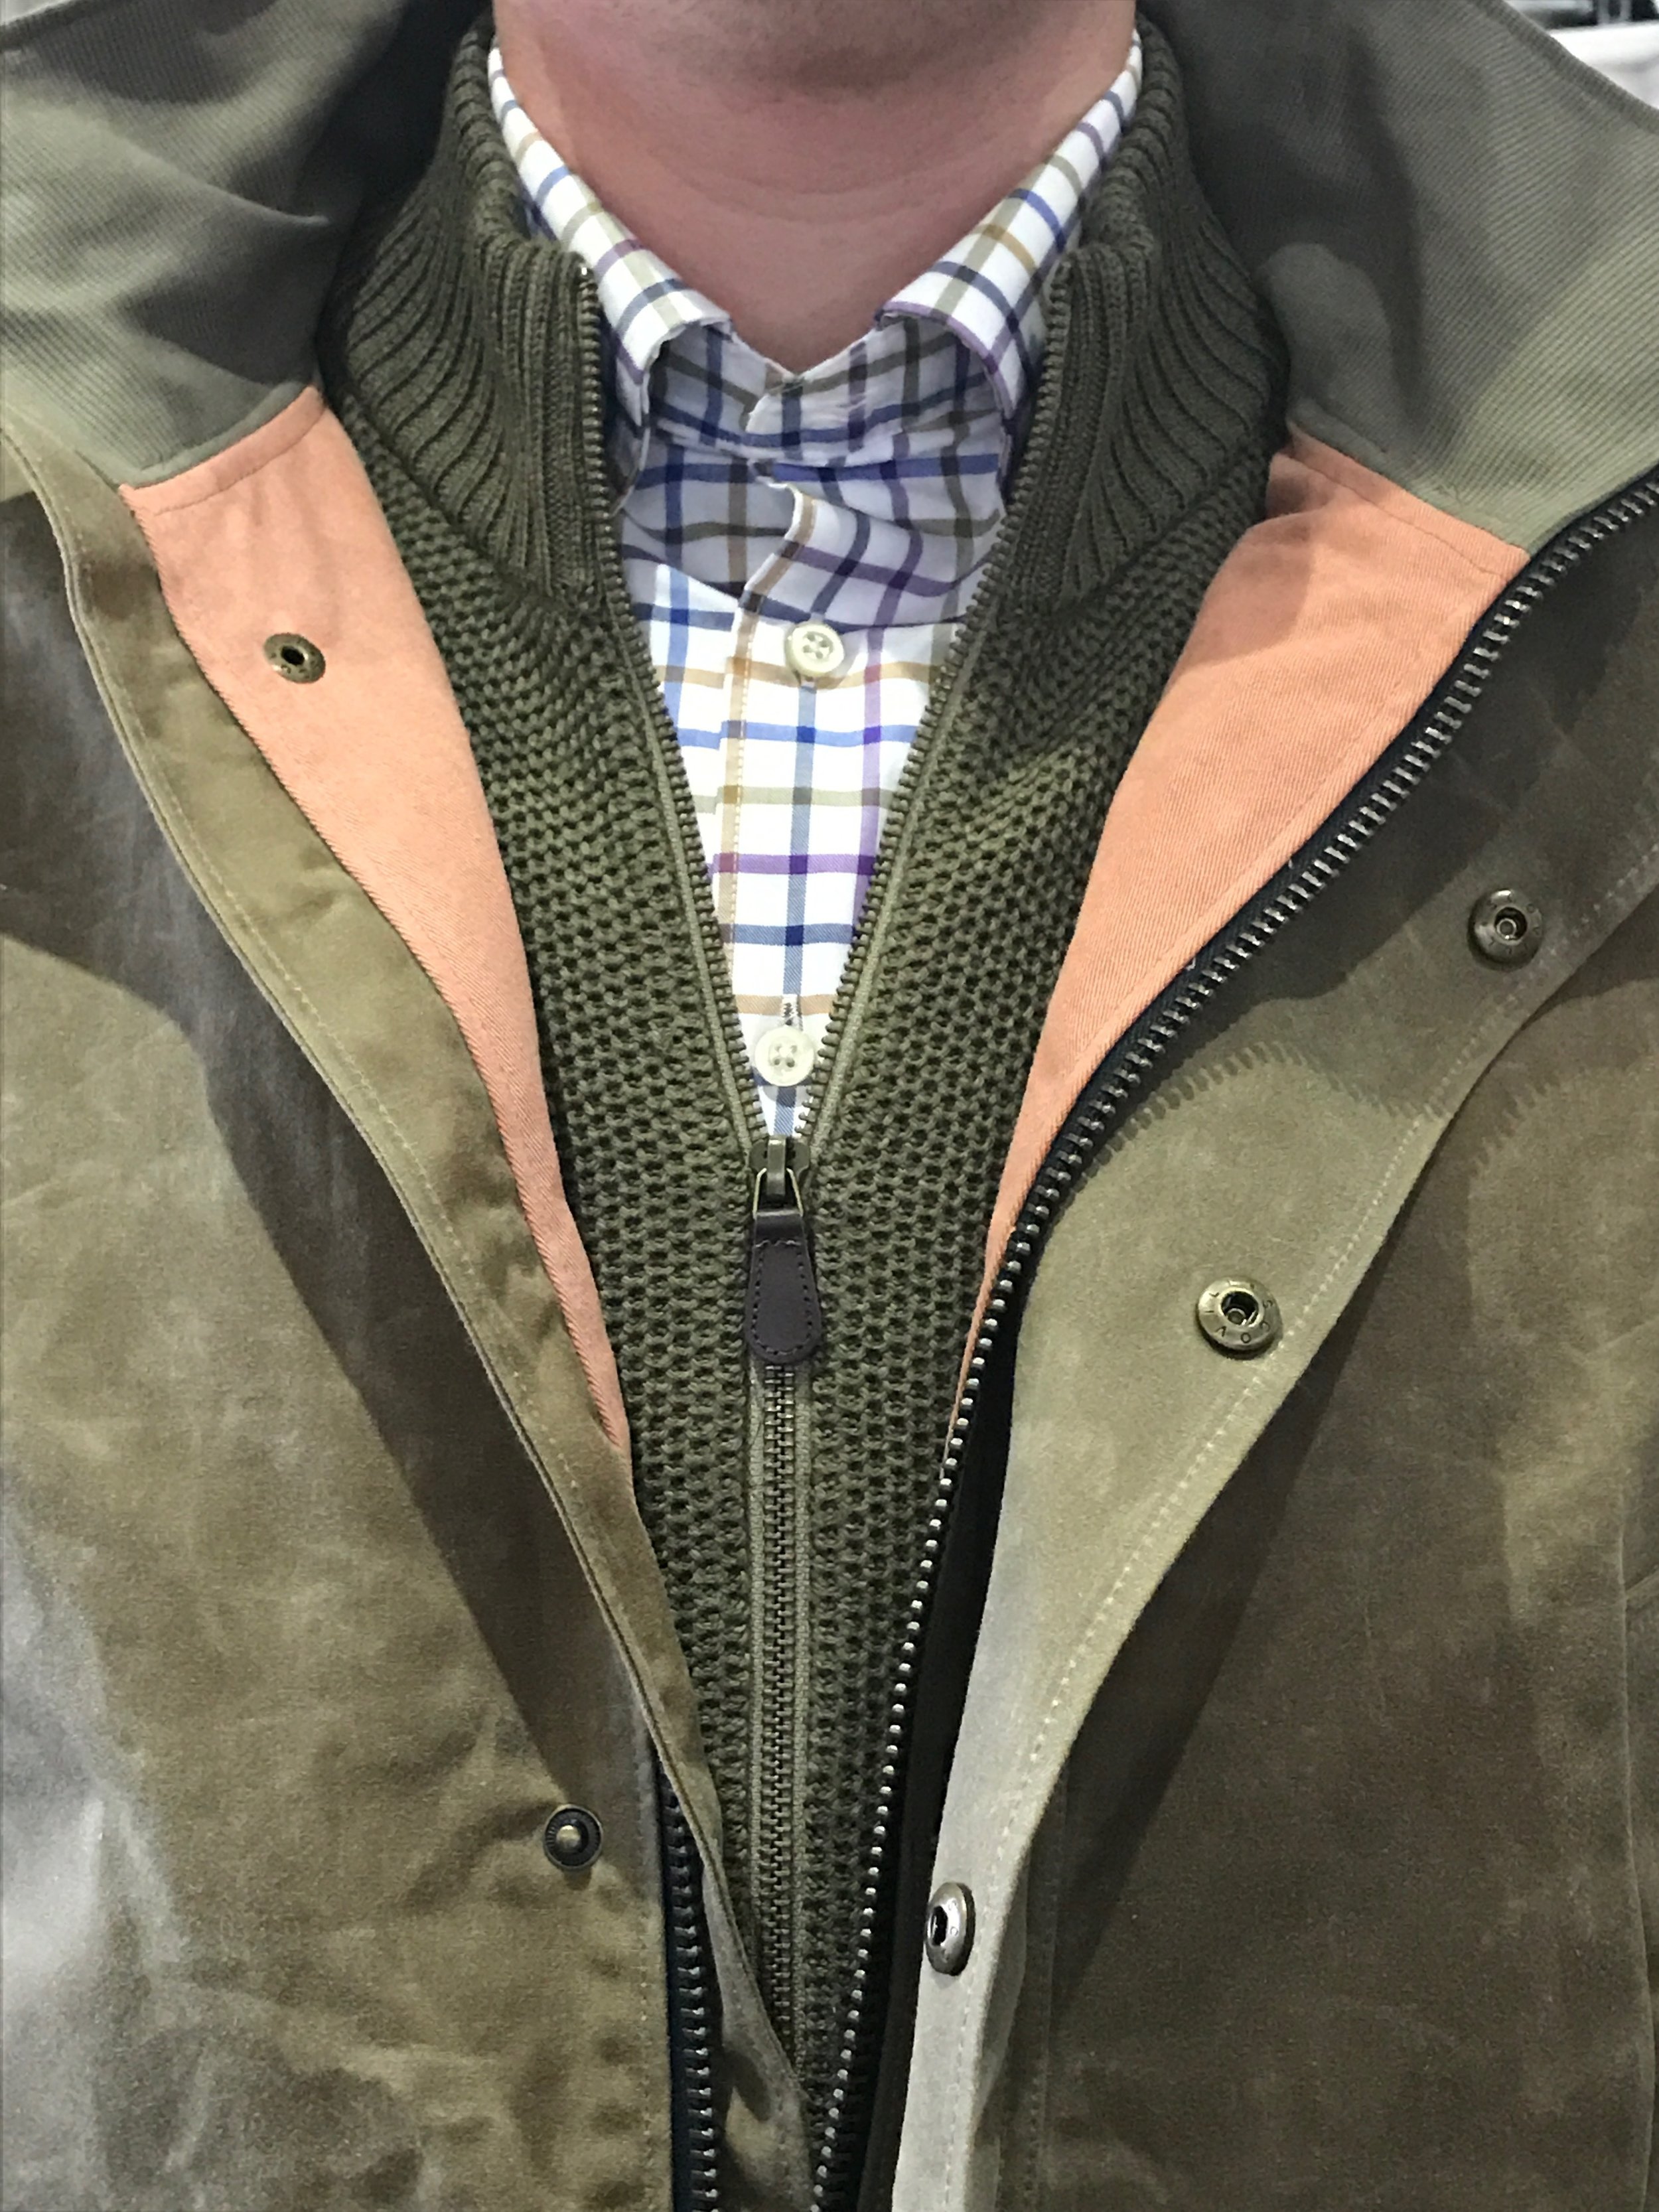 Layers barbour.JPG